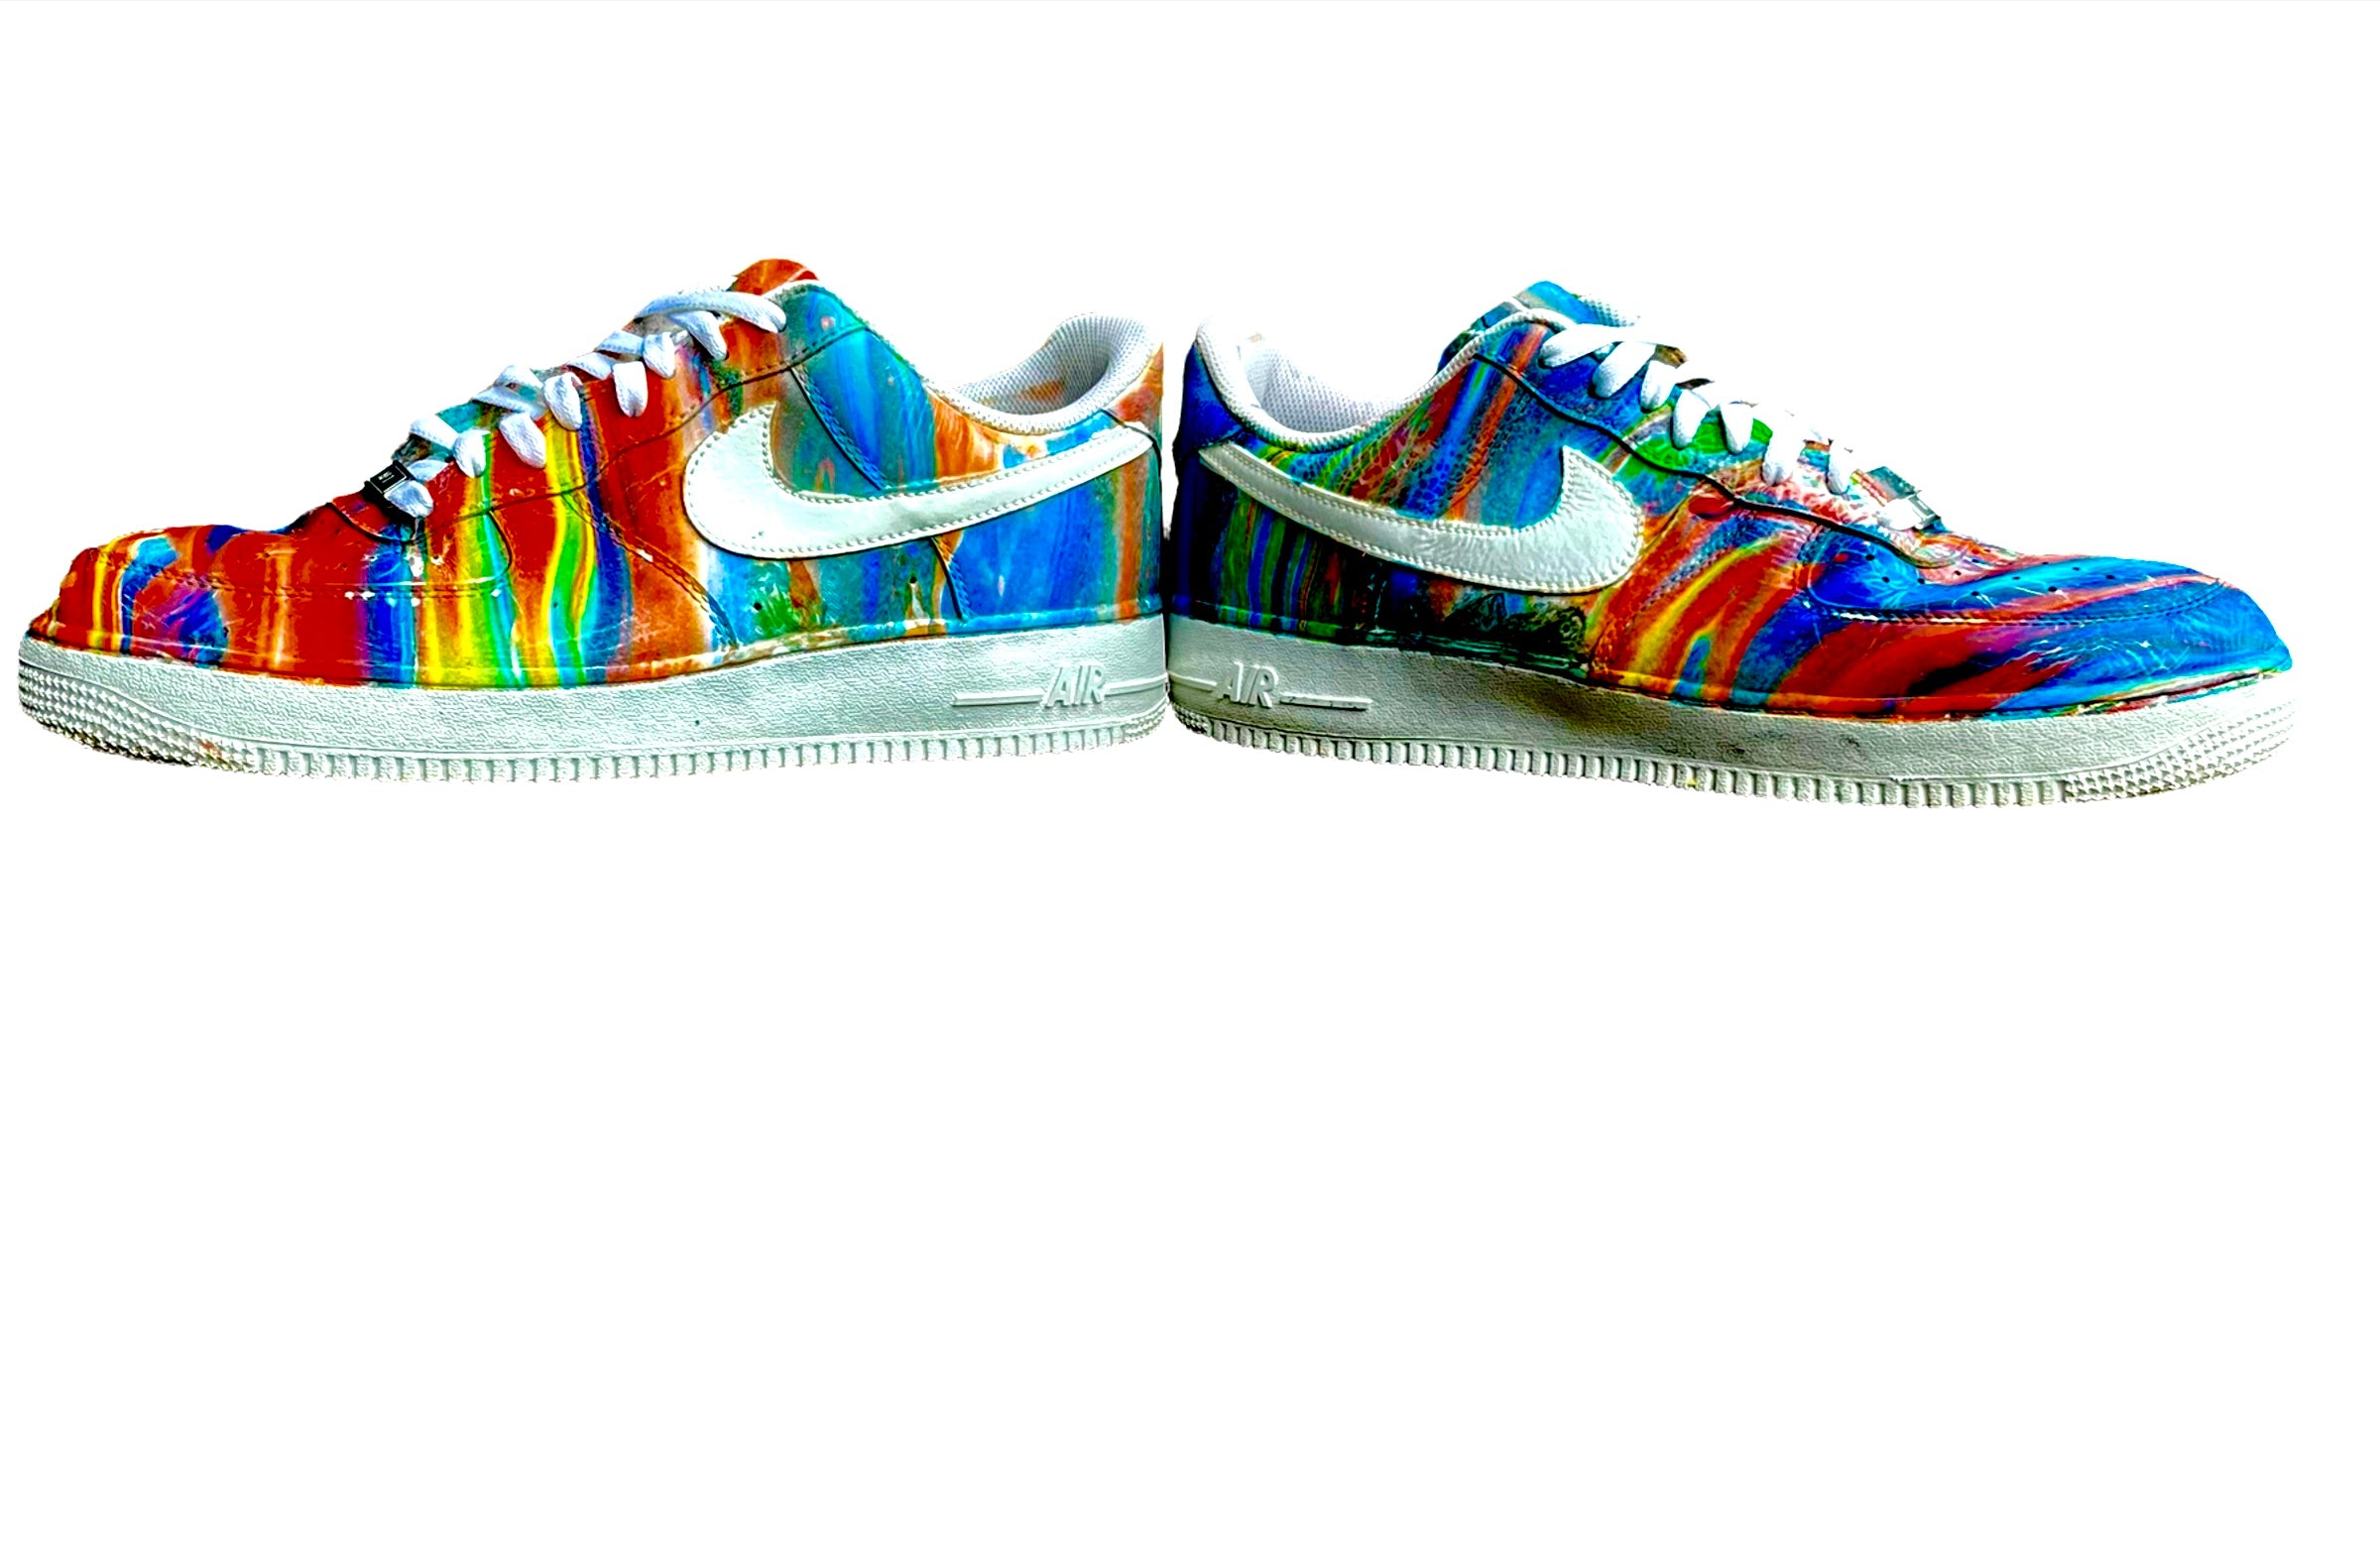 RLCS Custom Air Force 1 Low's by Semaj621. It features a blue